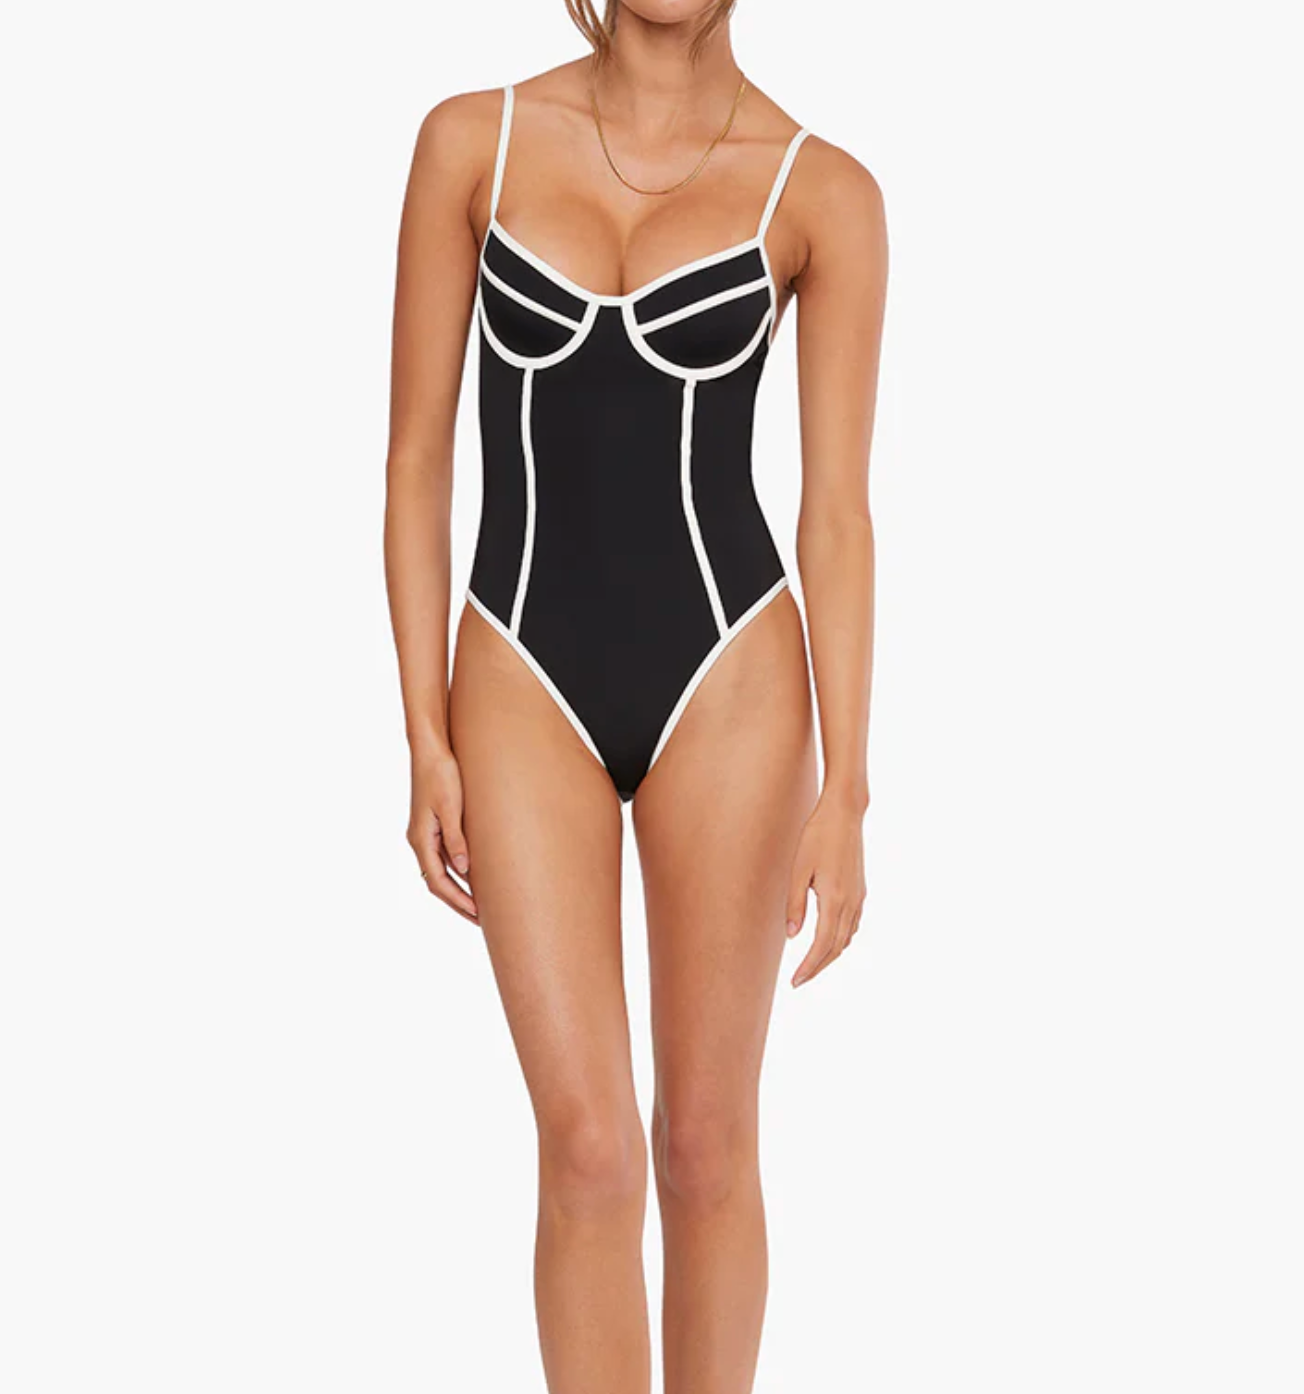 Danielle One Piece Swimsuit - Black/White - We Wore What